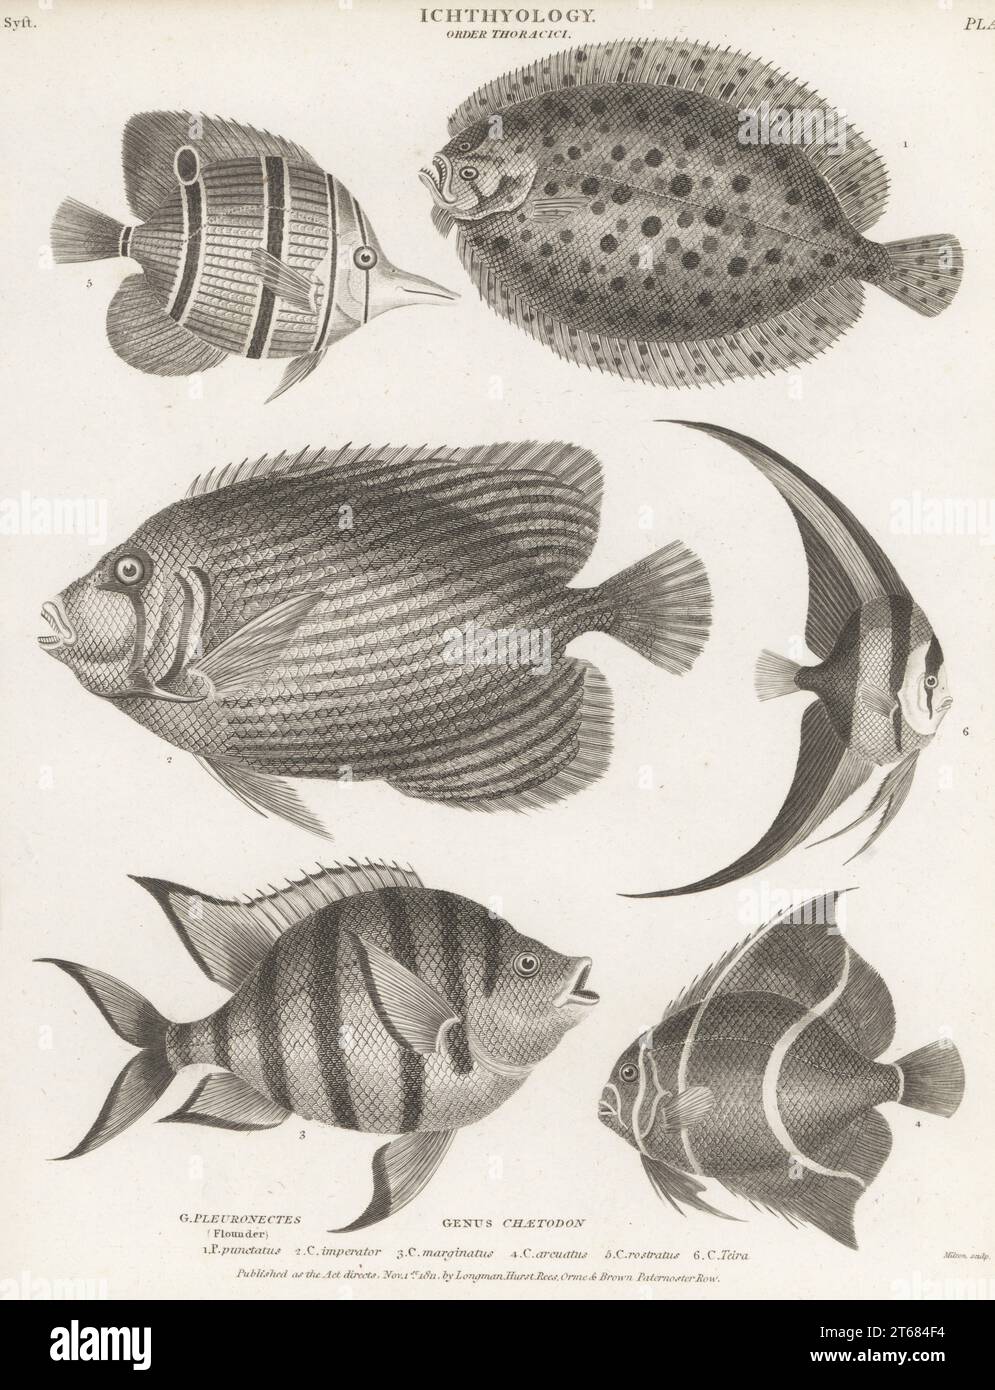 Common topknot, Zeugopterus punctatus 1, emperor angelfish, Pomacanthus imperator 2, sergeant major, Abudefduf saxatilis 3, gray angelfish, Pomacanthus arcuatus 4, copperband butterflyfish, Chelmon rostratus 5, teira batfish, Platax teira 6. Copperplate engraving by Thomas Milton from Abraham Rees' Cyclopedia or Universal Dictionary of Arts, Sciences and Literature, Longman, Hurst, Rees, Orme and Brown, Paternoster Row, London, November 1, 1811. Stock Photo